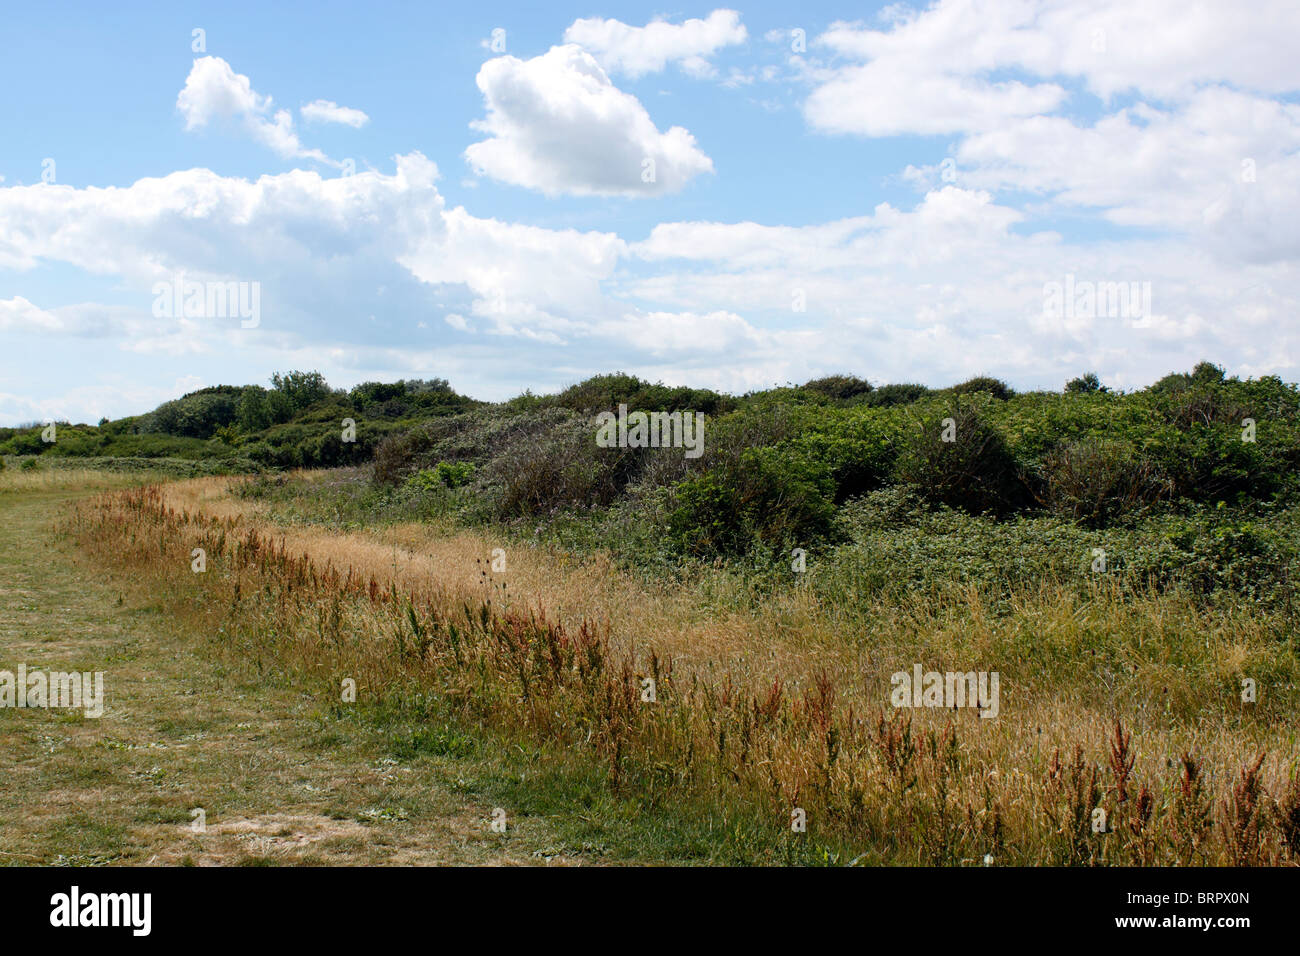 THE NAZE AT WALTON-ON-THE-NAZE IN THE COUNTY OF ESSEX. UK. Stock Photo